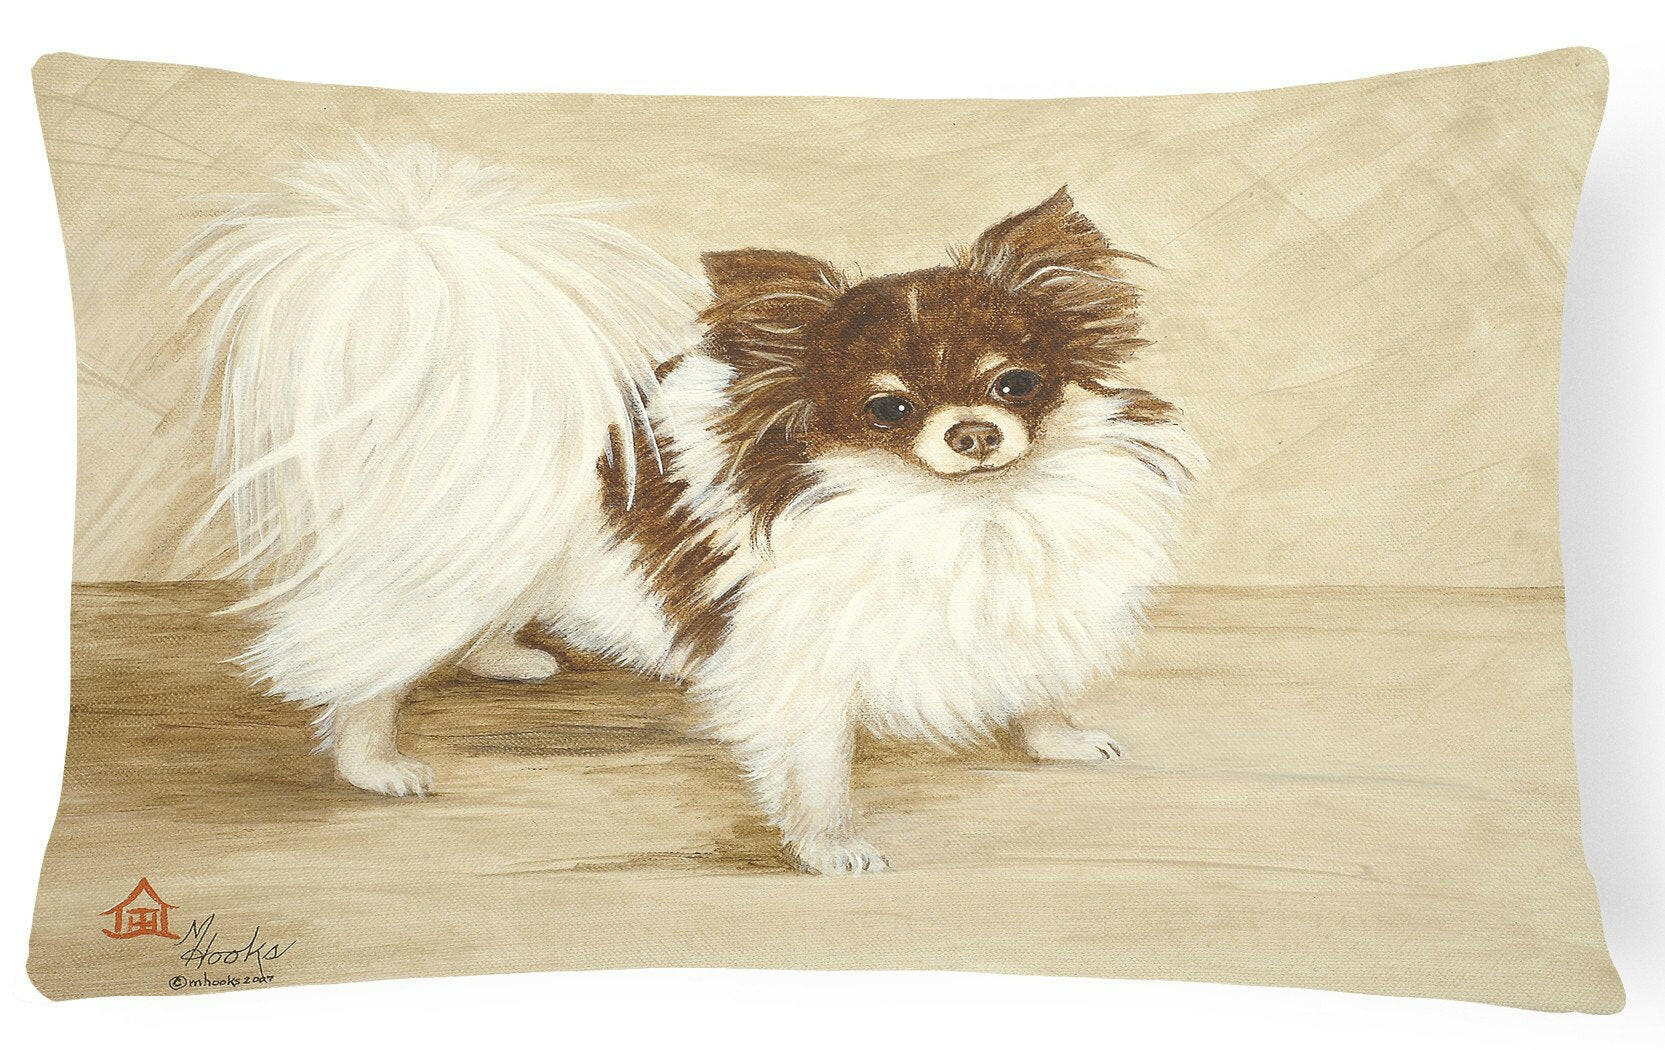 Chihuahua Favorite Flavors Fabric Decorative Pillow MH1051PW1216 by Caroline's Treasures